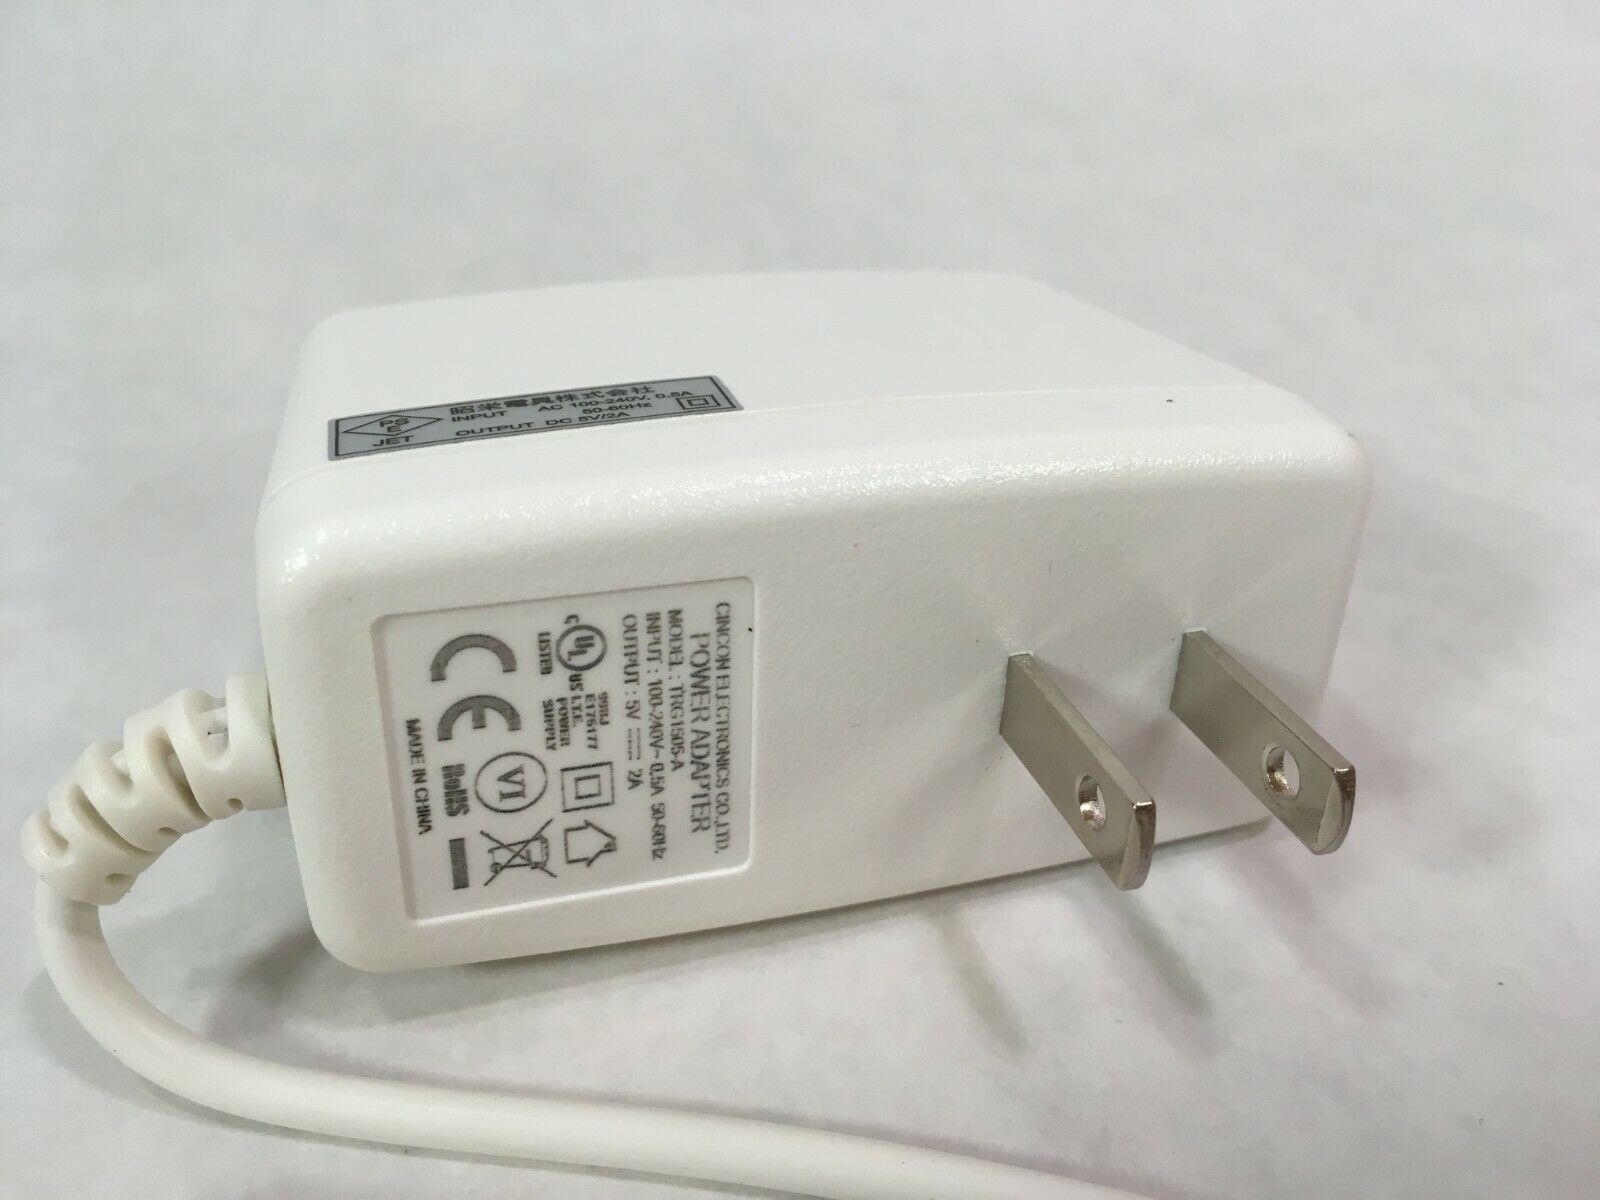 NEW Cincon Electronics TRG1505-A Power Adapter Charger 5V 2A 10W - Click Image to Close